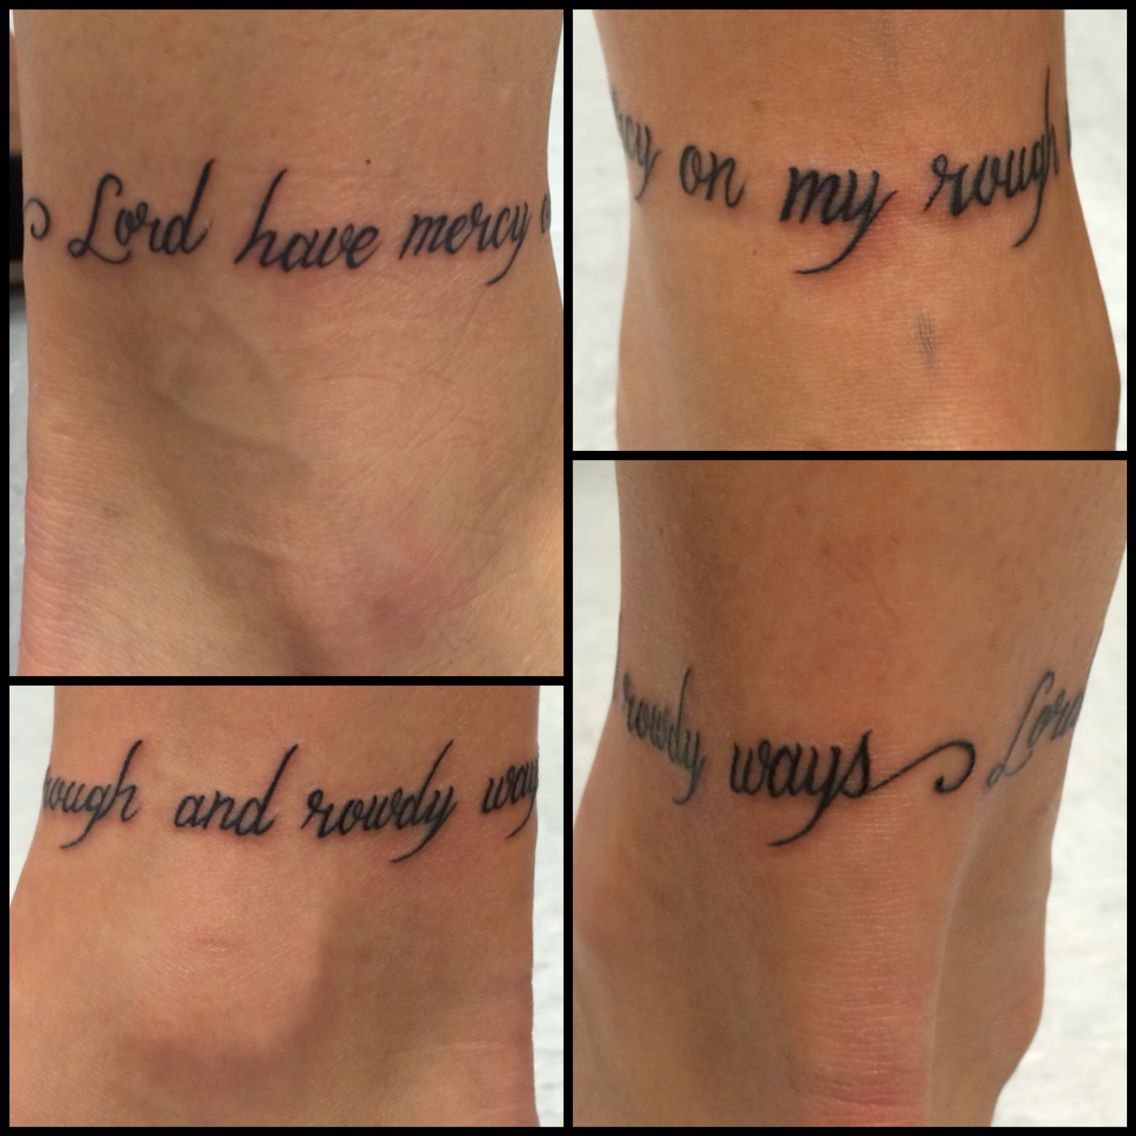 Song lyrics as tattoos around the ankle